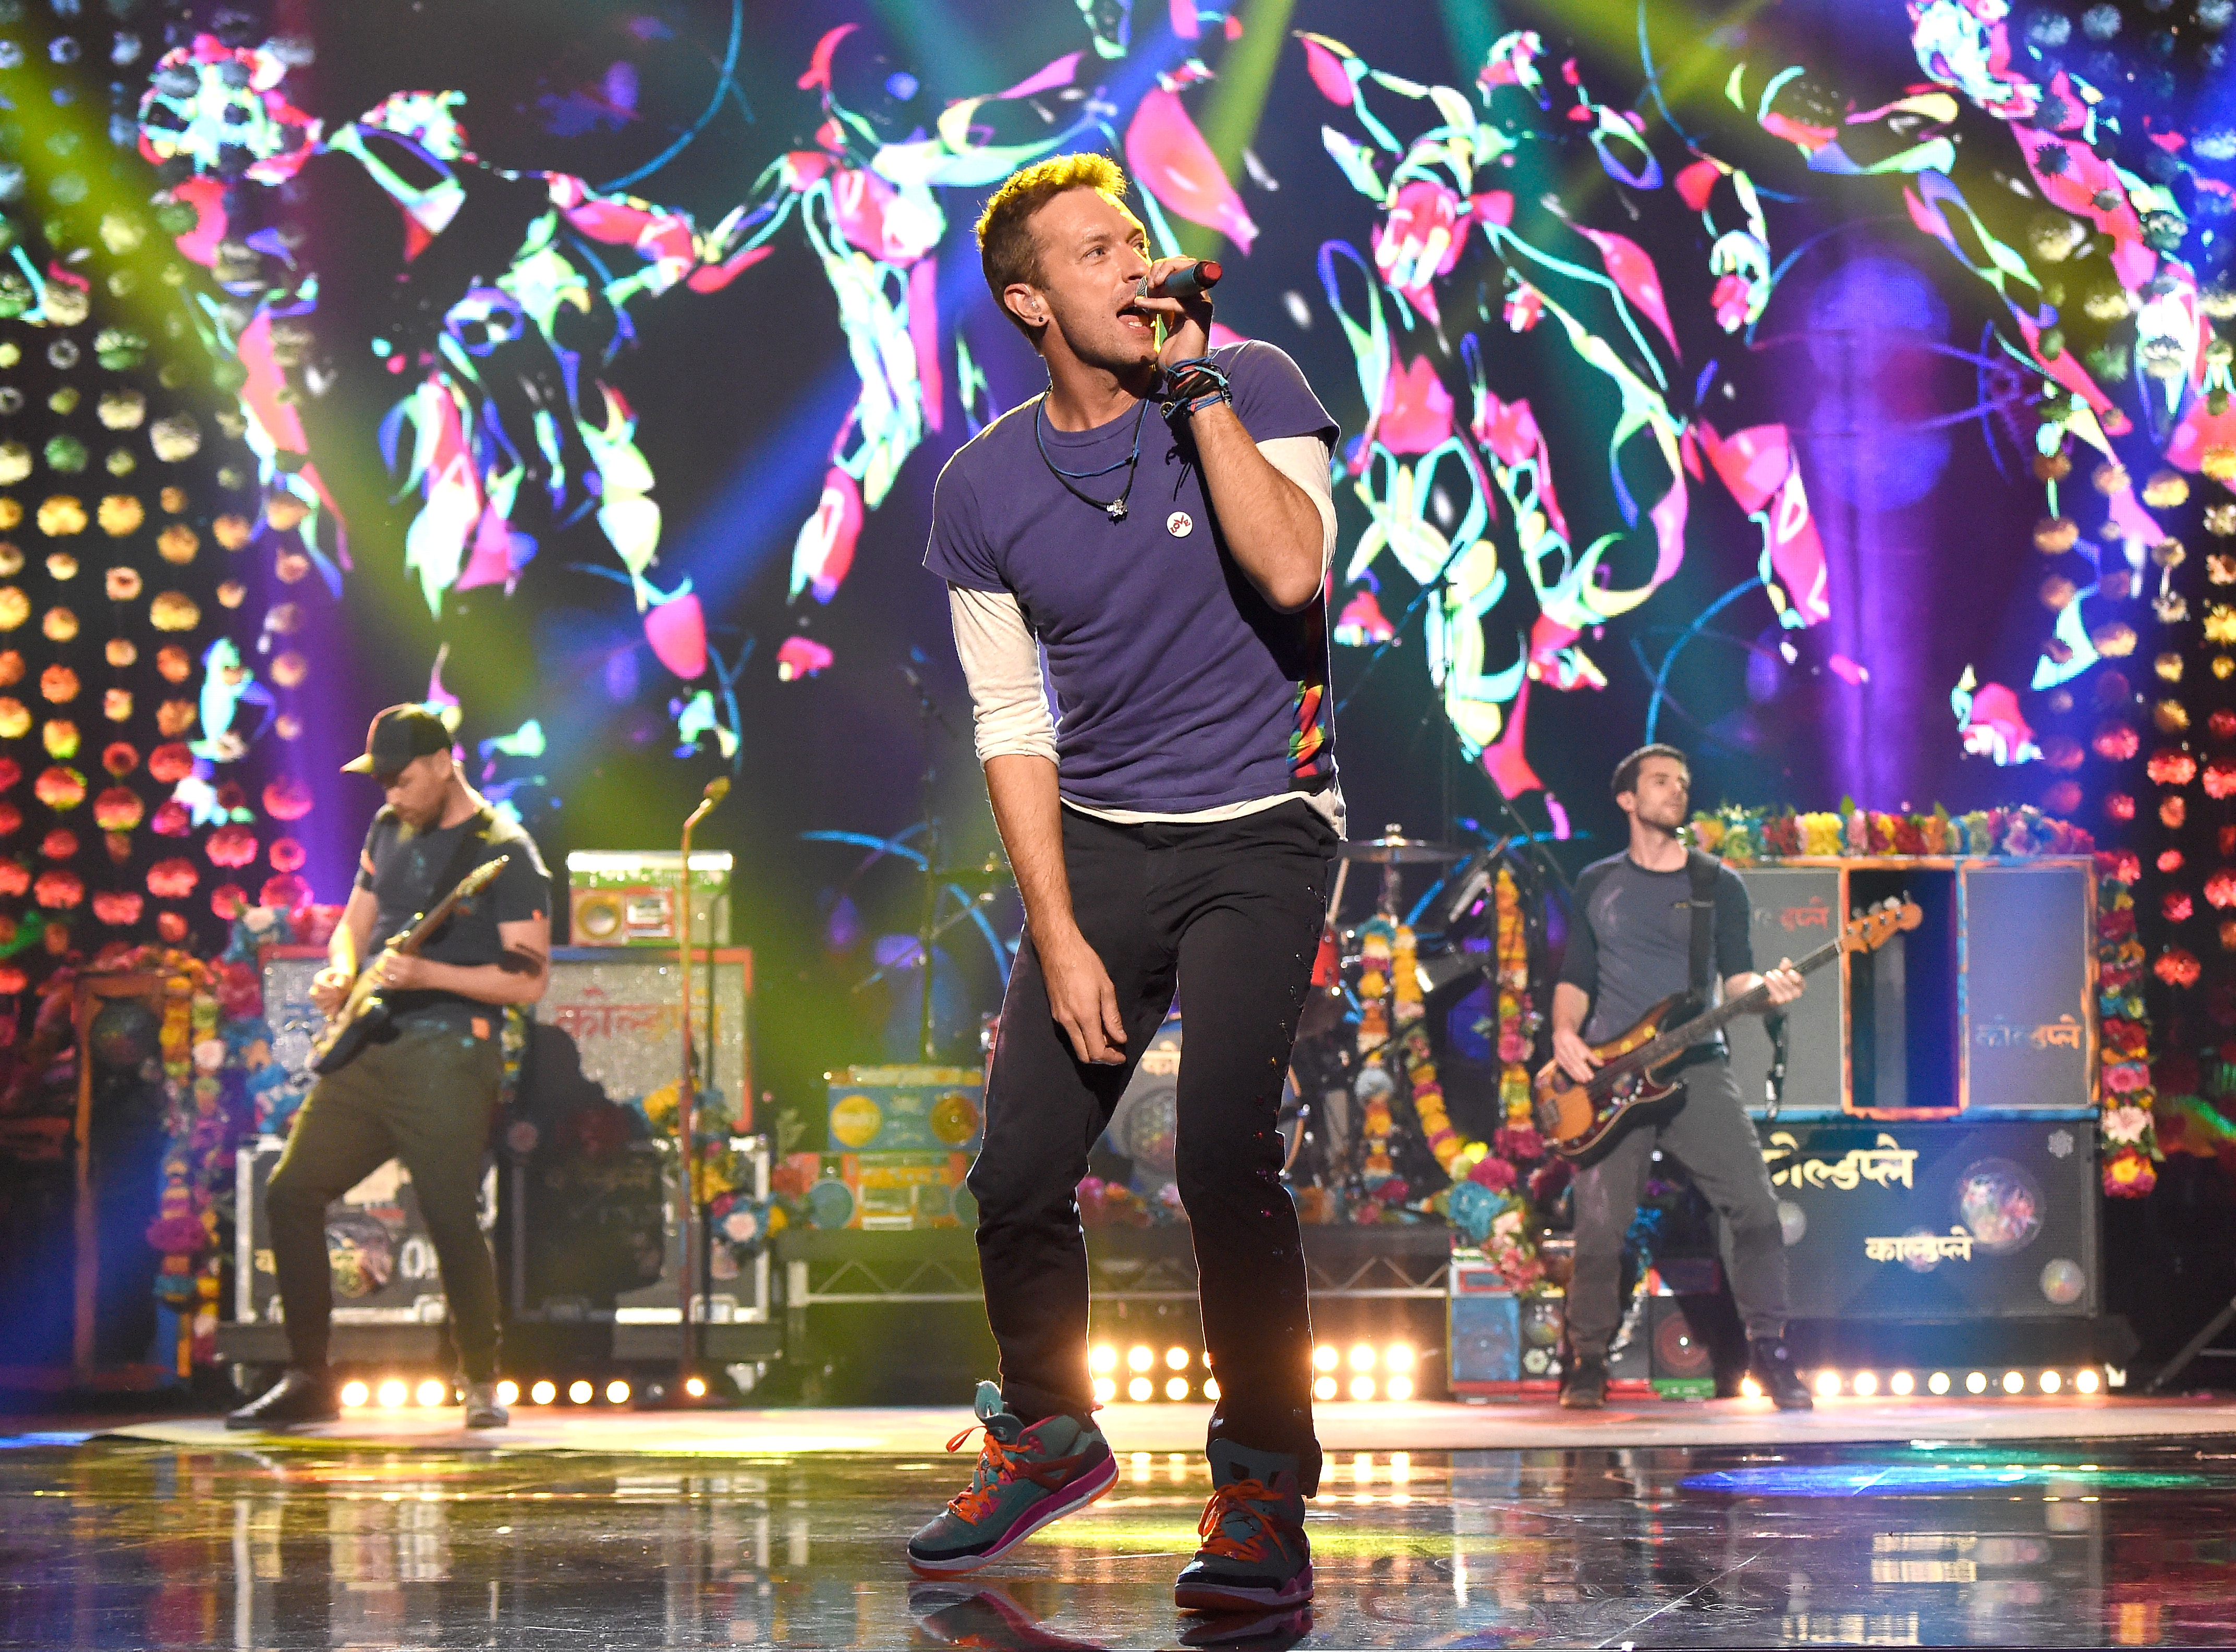 Chris Martin of Coldplay  performs onstage during the 2015 American Music Awards at Microsoft Theater on Nov. 22, 2015 in Los Angeles. (Kevin Mazur—AMA2015/WireImage/Getty Images)